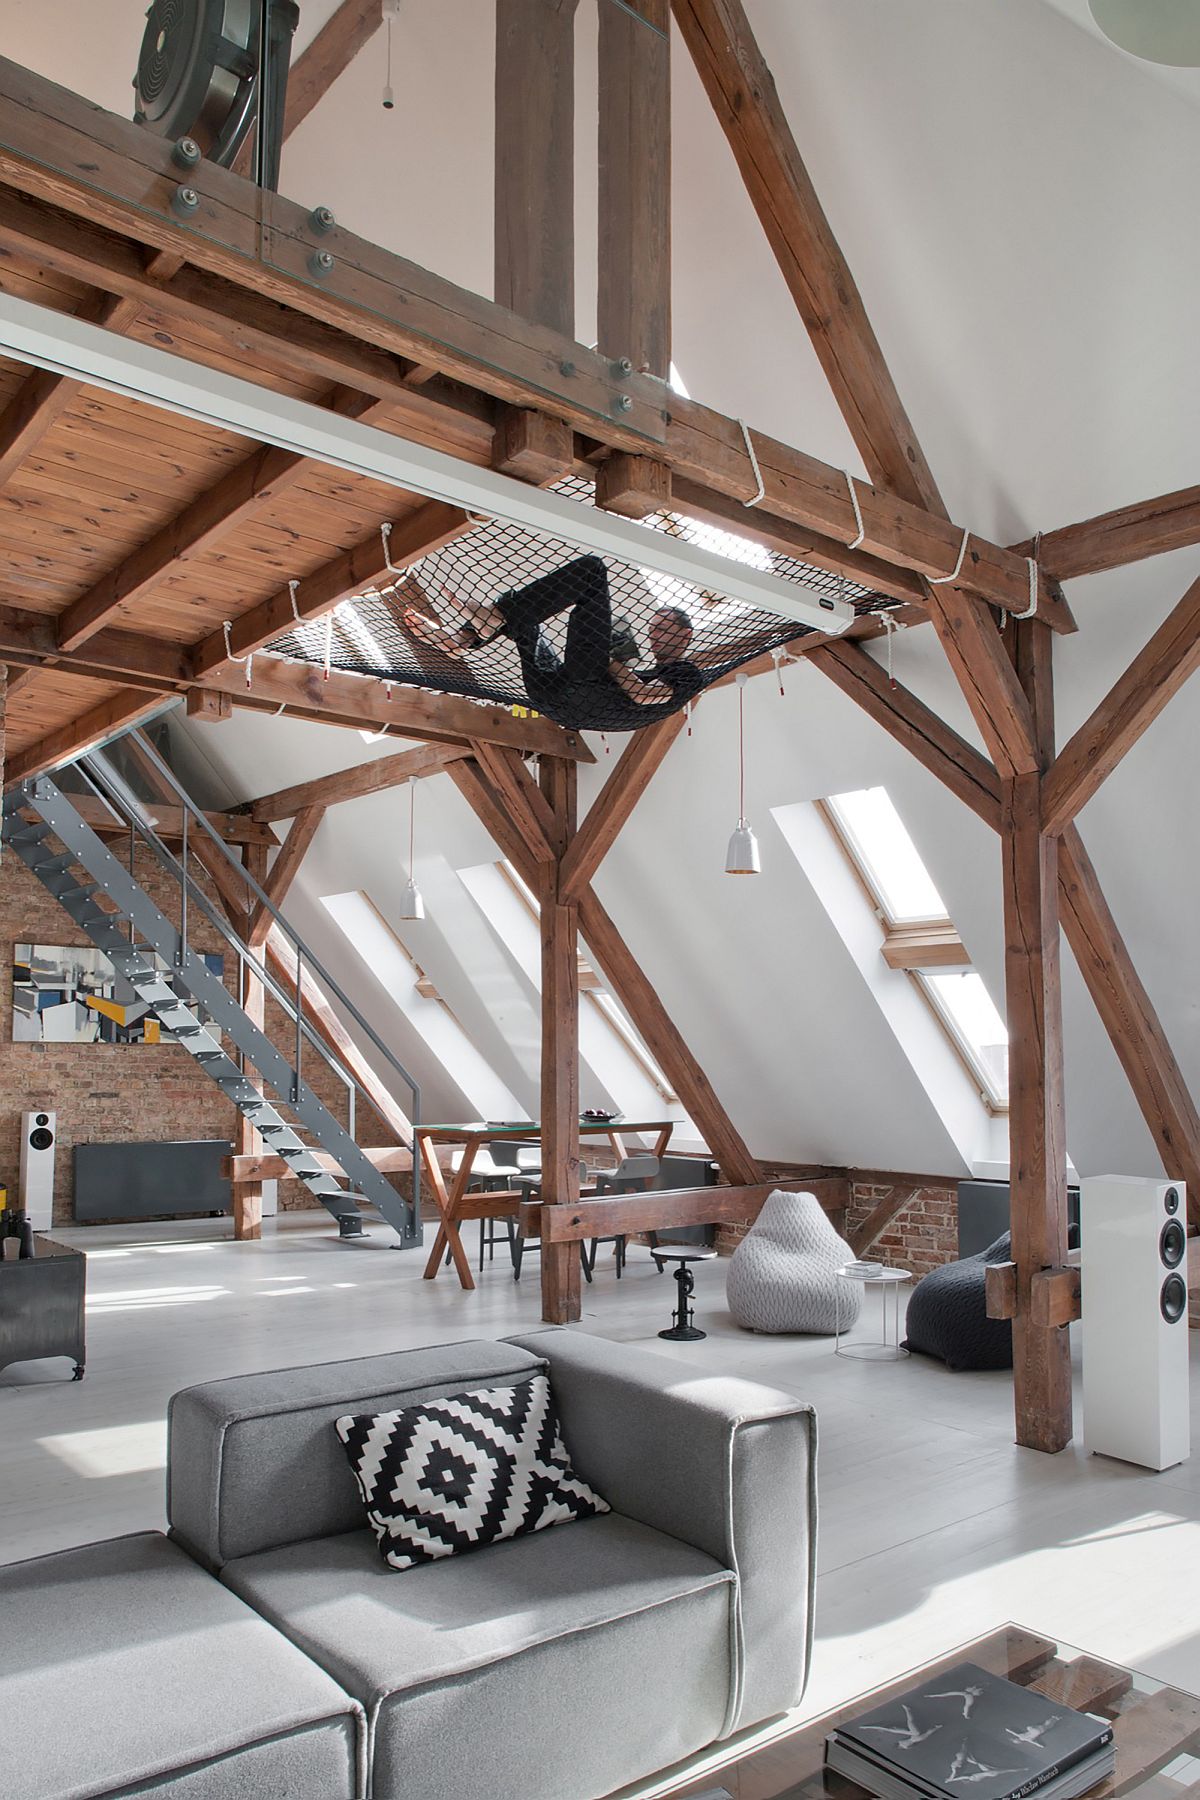 Mezzanine level of the attic apartment with relaxing hammock